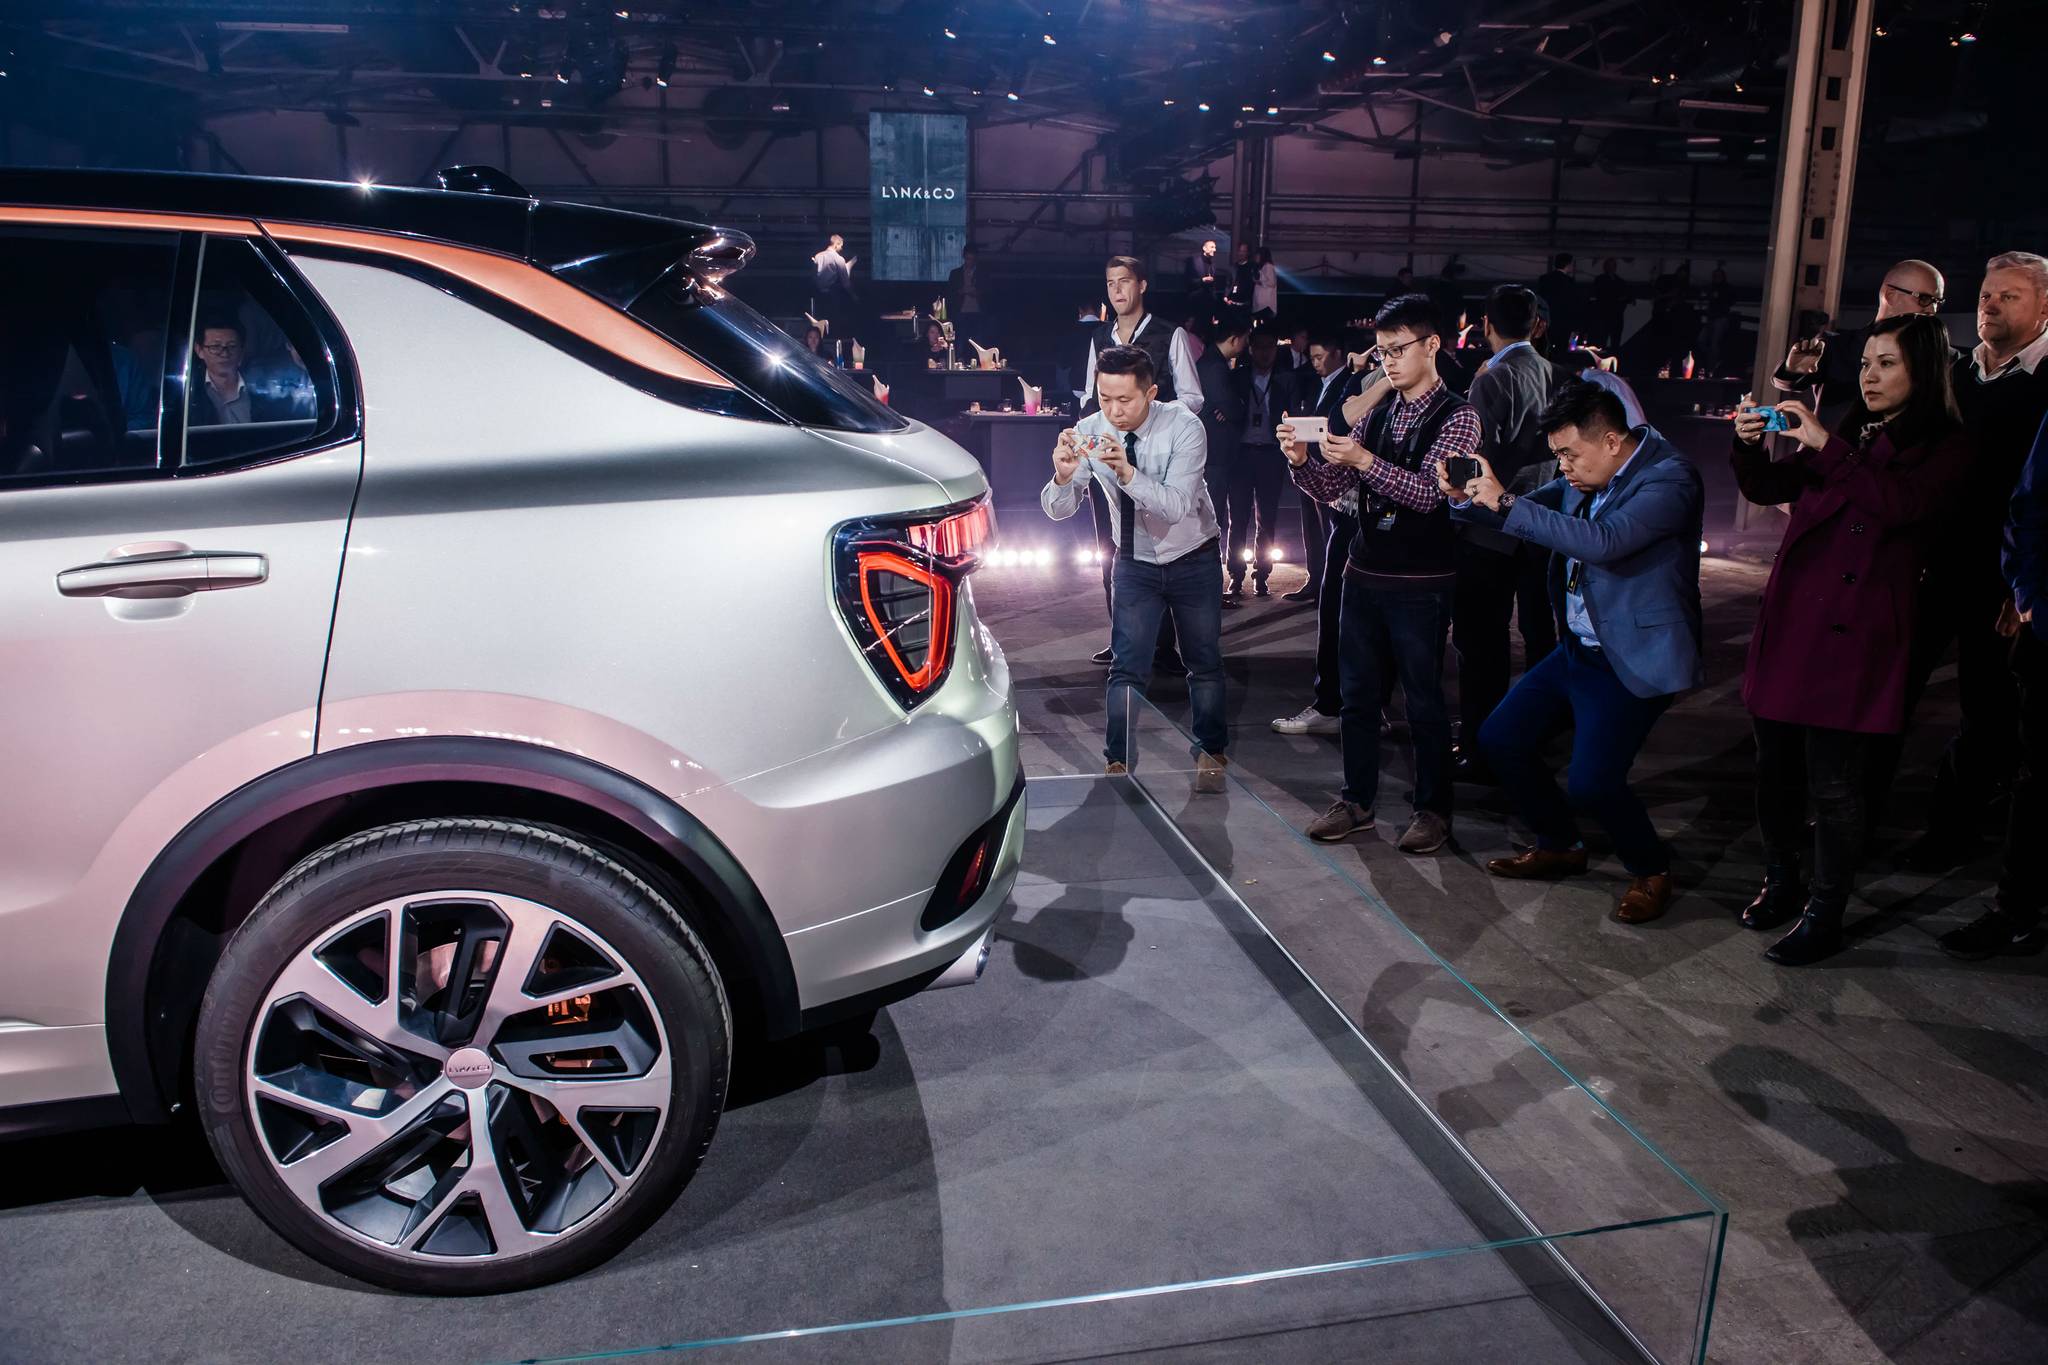 Lynk & Co: a car designed to be shared